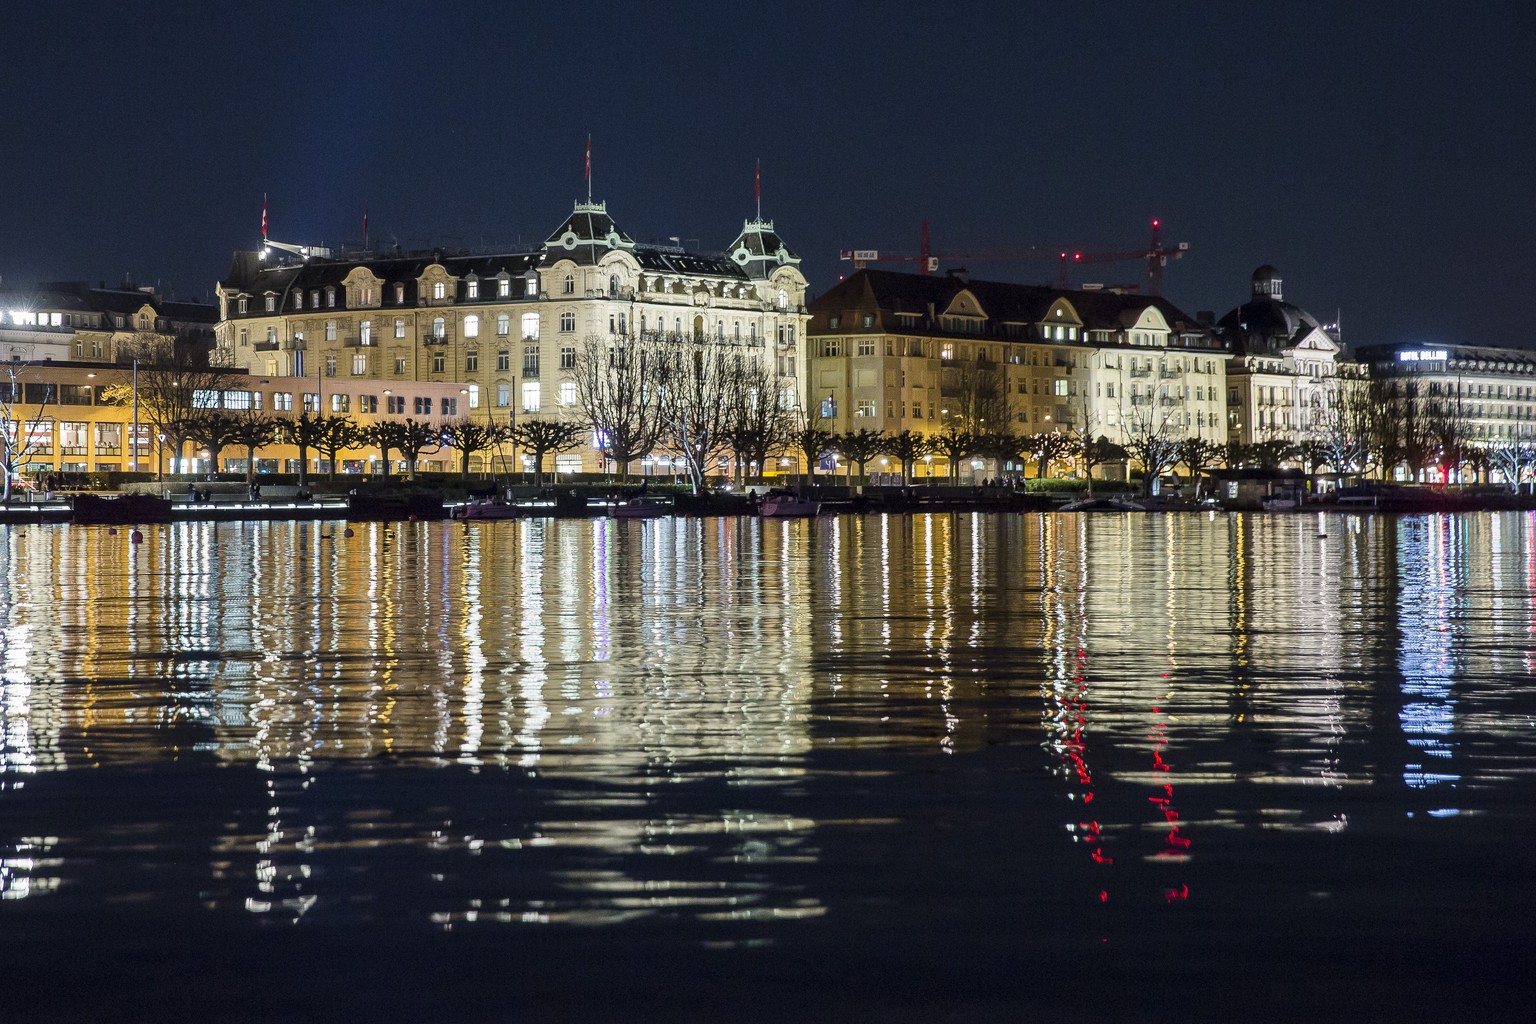 The bank of the Lake of Zurich is pictured this Friday, March 18, 2016 in Zurich. (KEYSTONE/Cyril Zingaro)